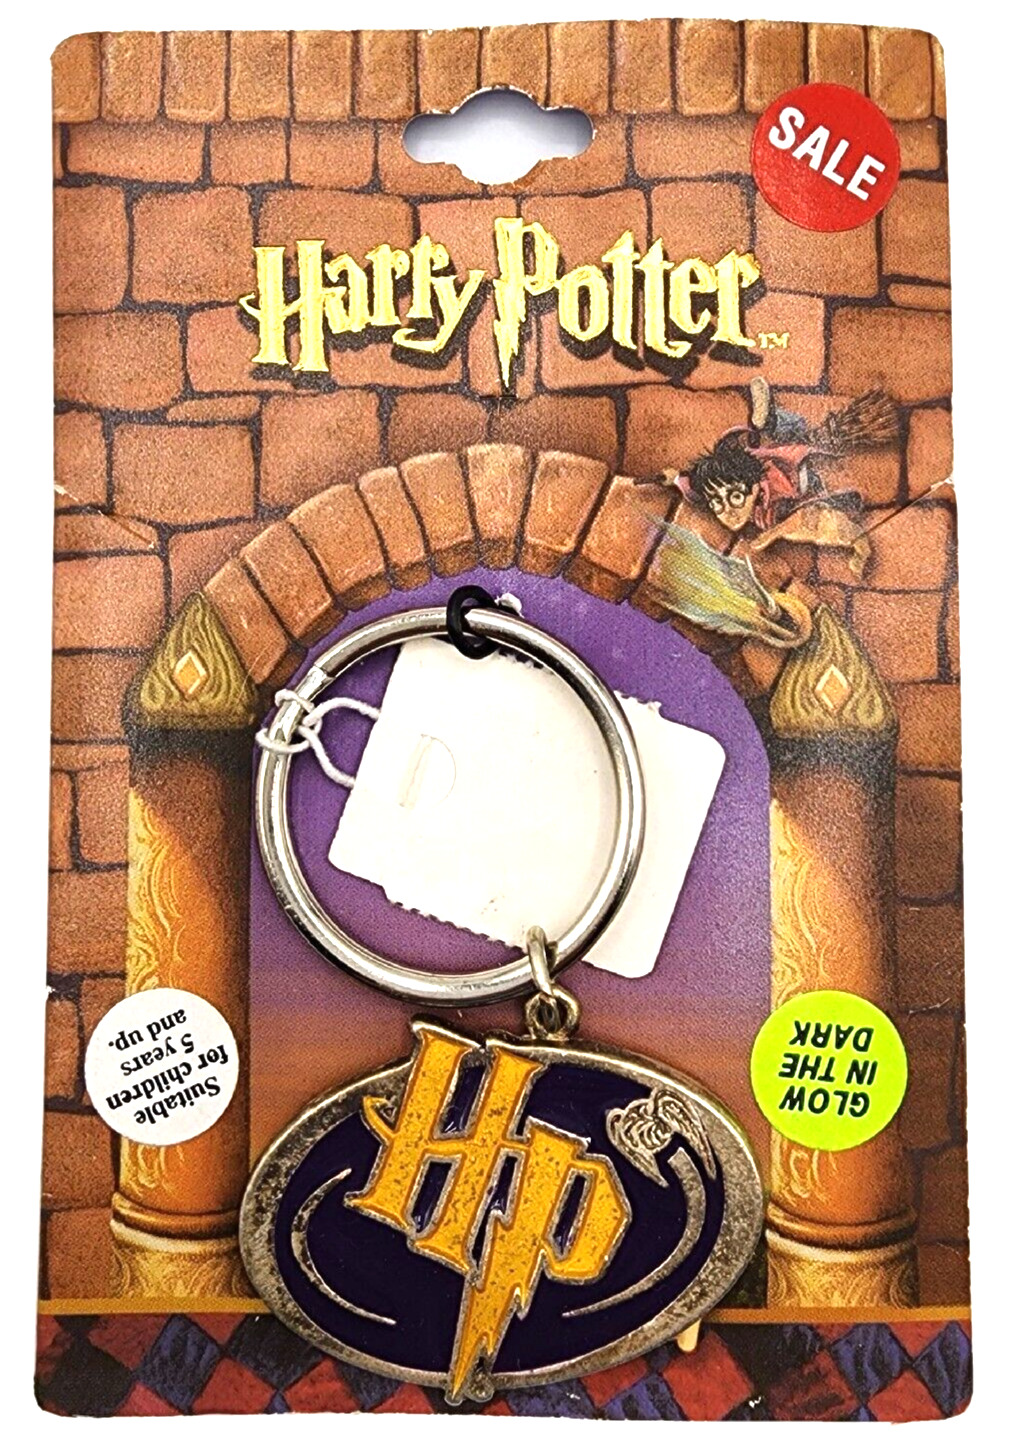 NOS Good Condition Original Package Harry Potter HP Glow In The Dark Keychain